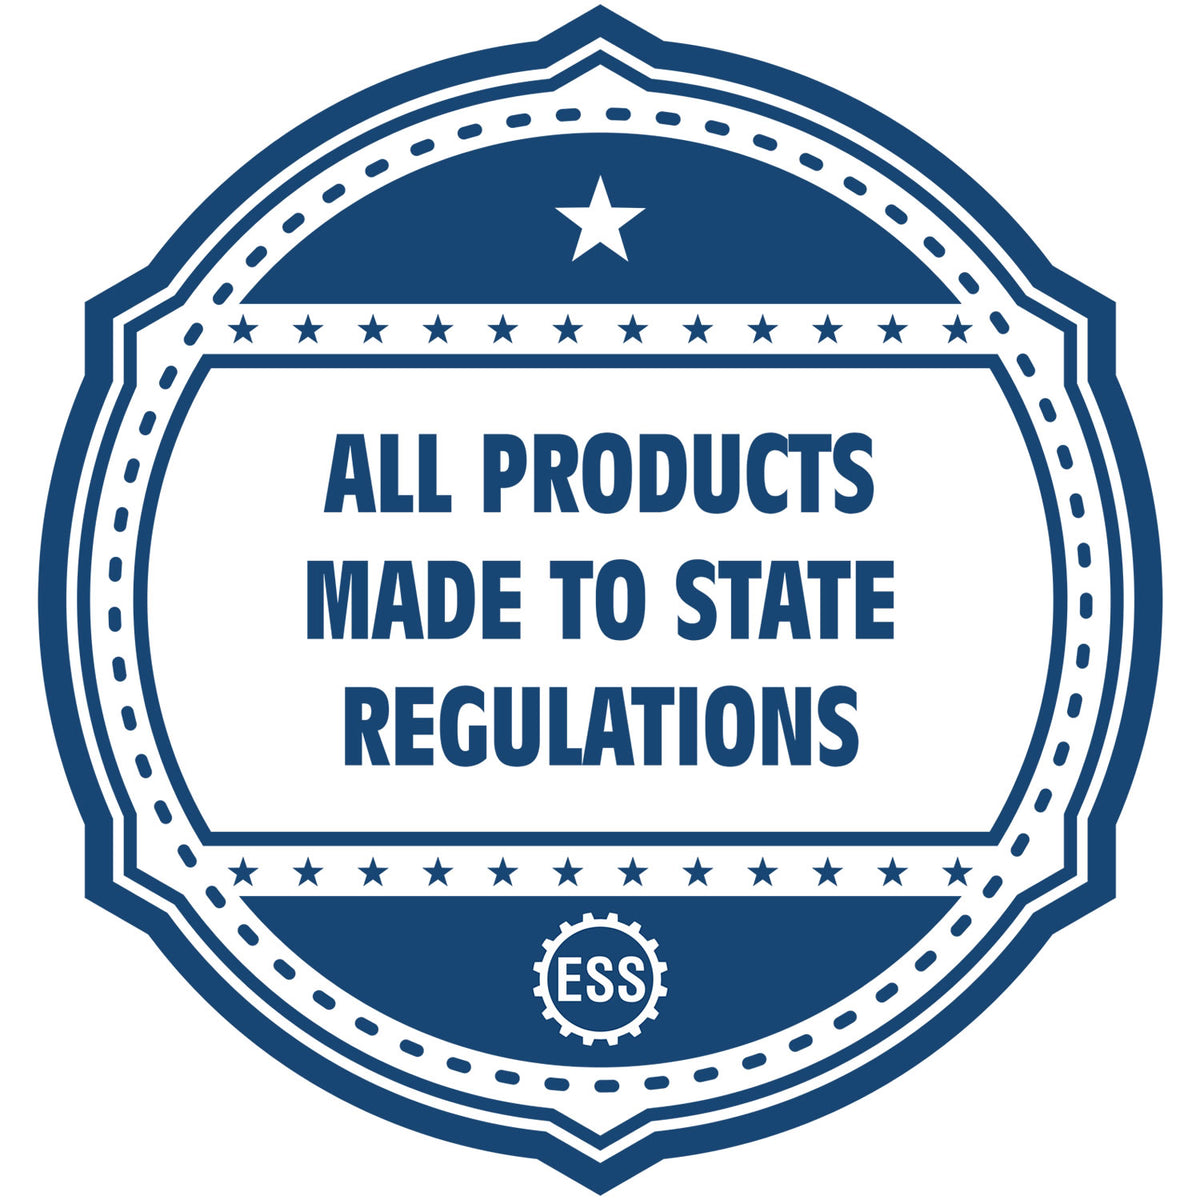 A blue icon or badge for the Slim Pre-Inked Minnesota Professional Geologist Seal Stamp showing that this product is made in compliance with state regulations.